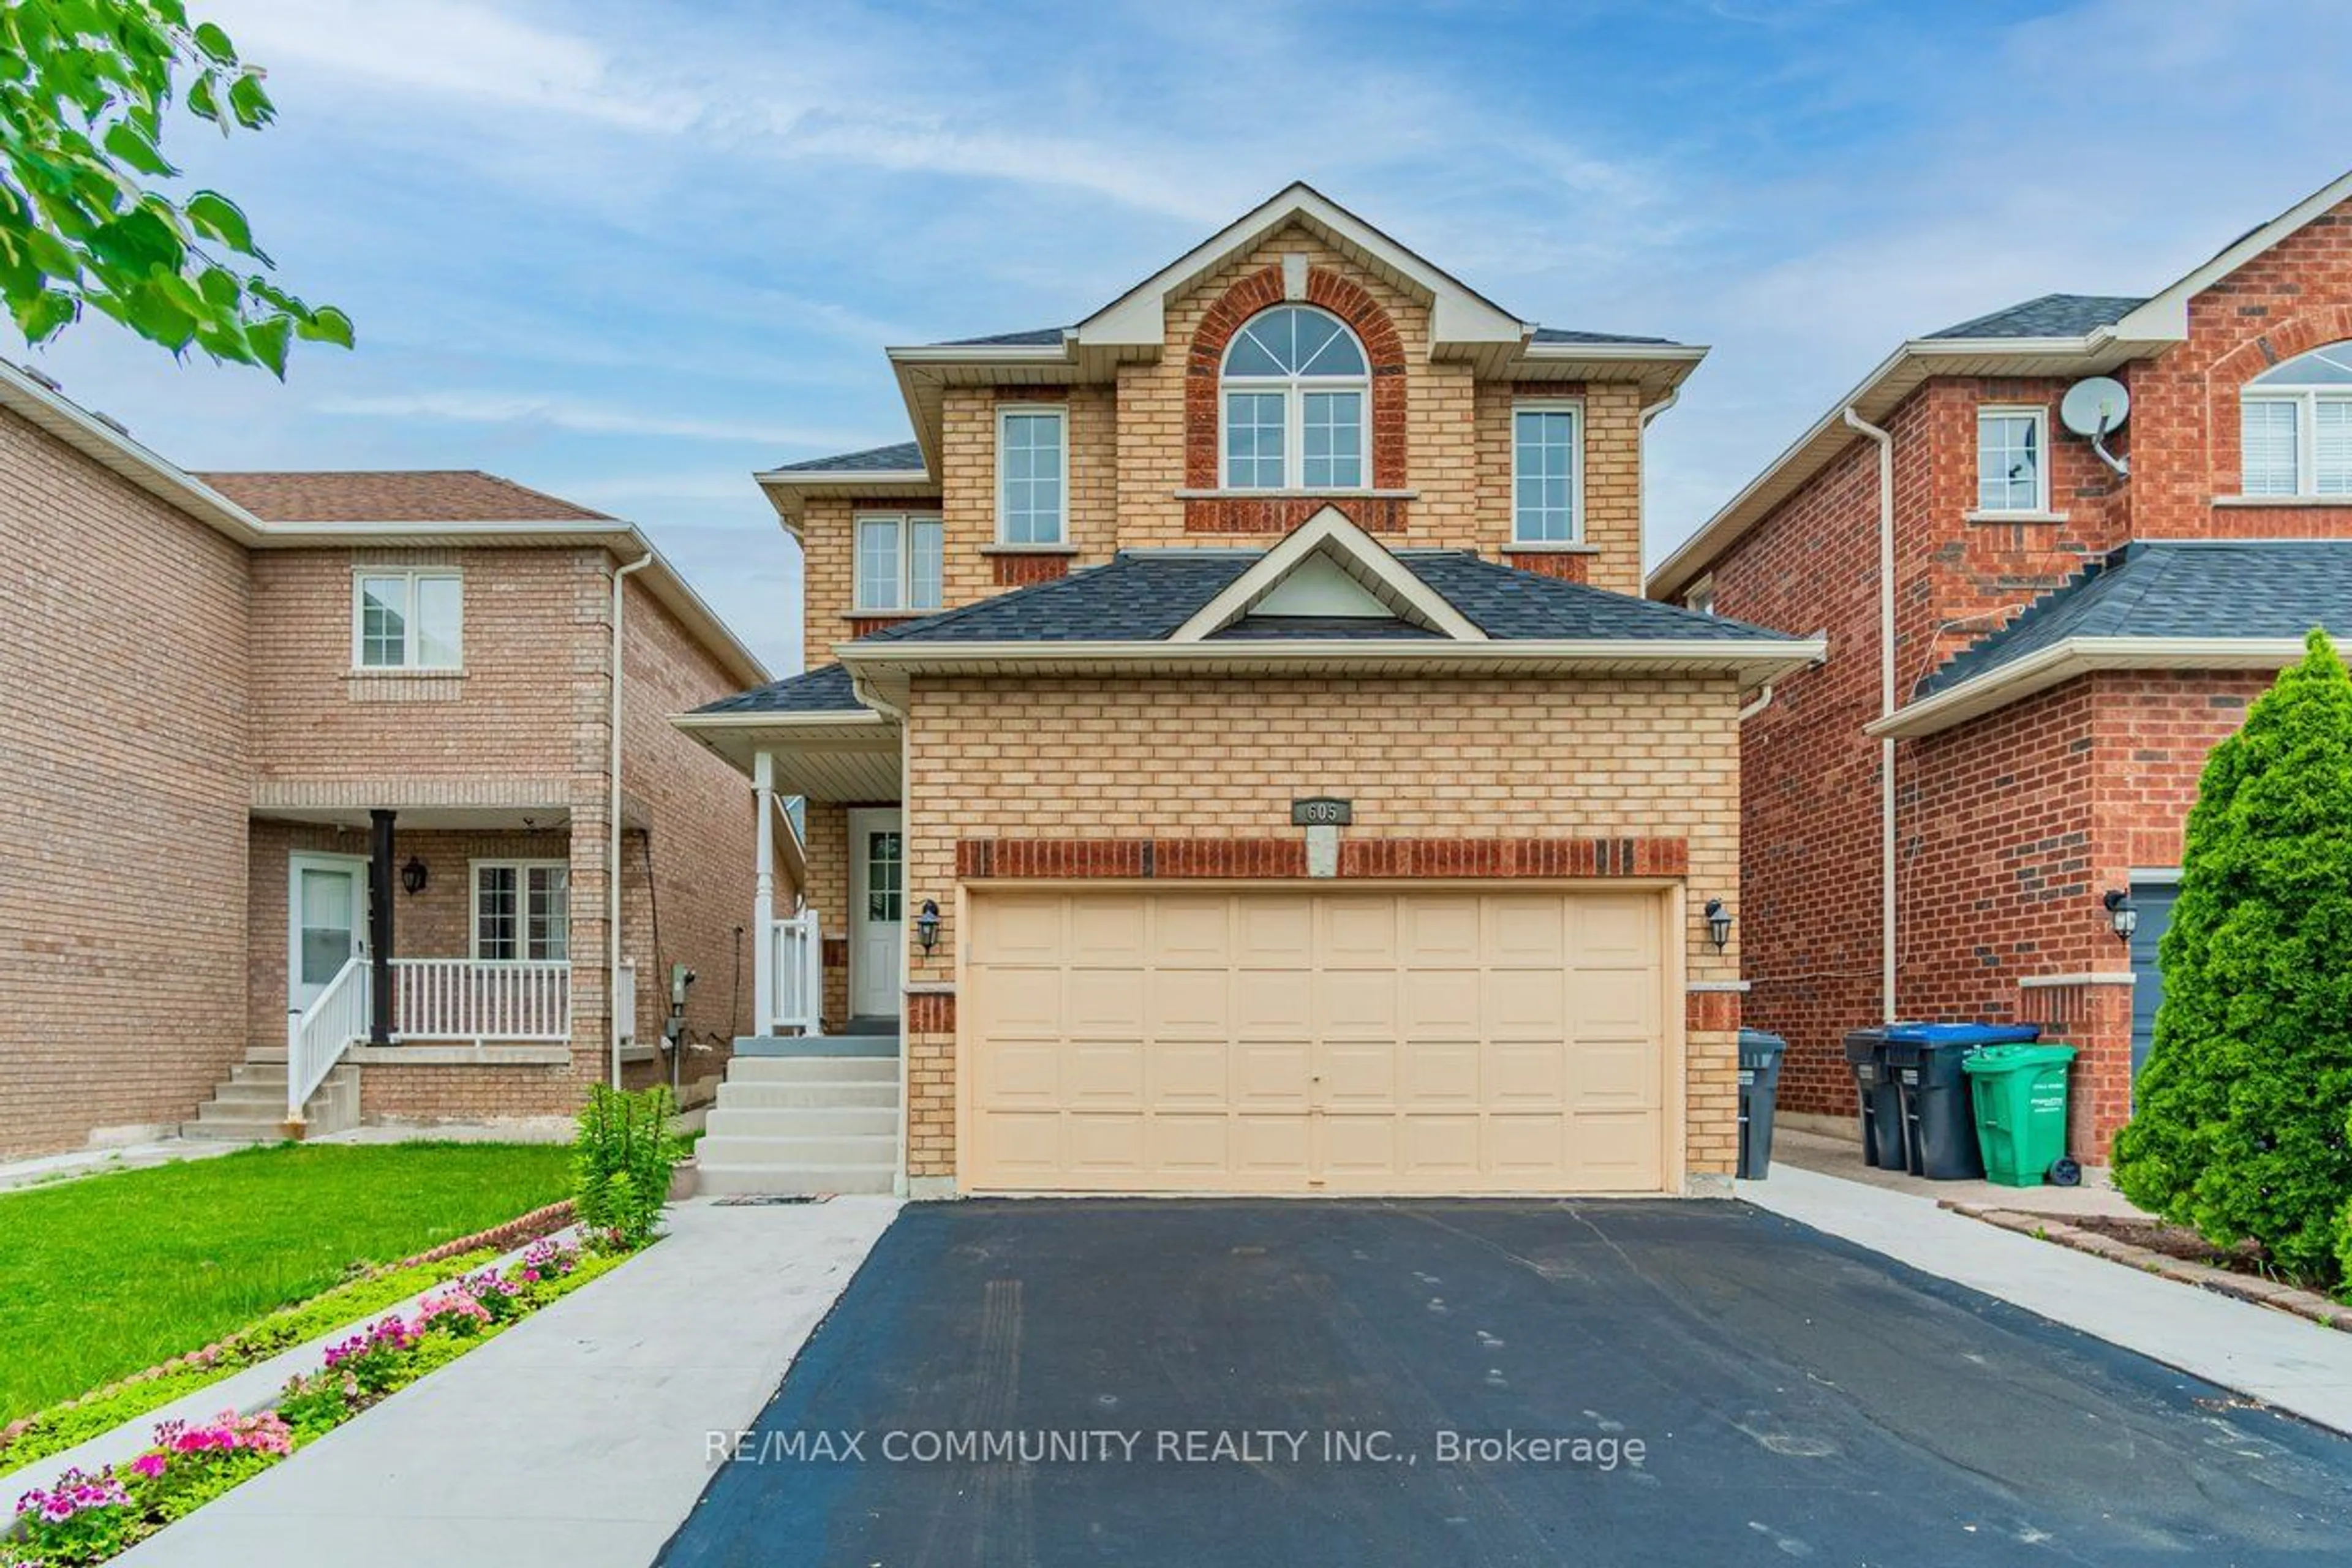 Home with brick exterior material for 605 Matisse Pl, Mississauga Ontario L5W 1K8